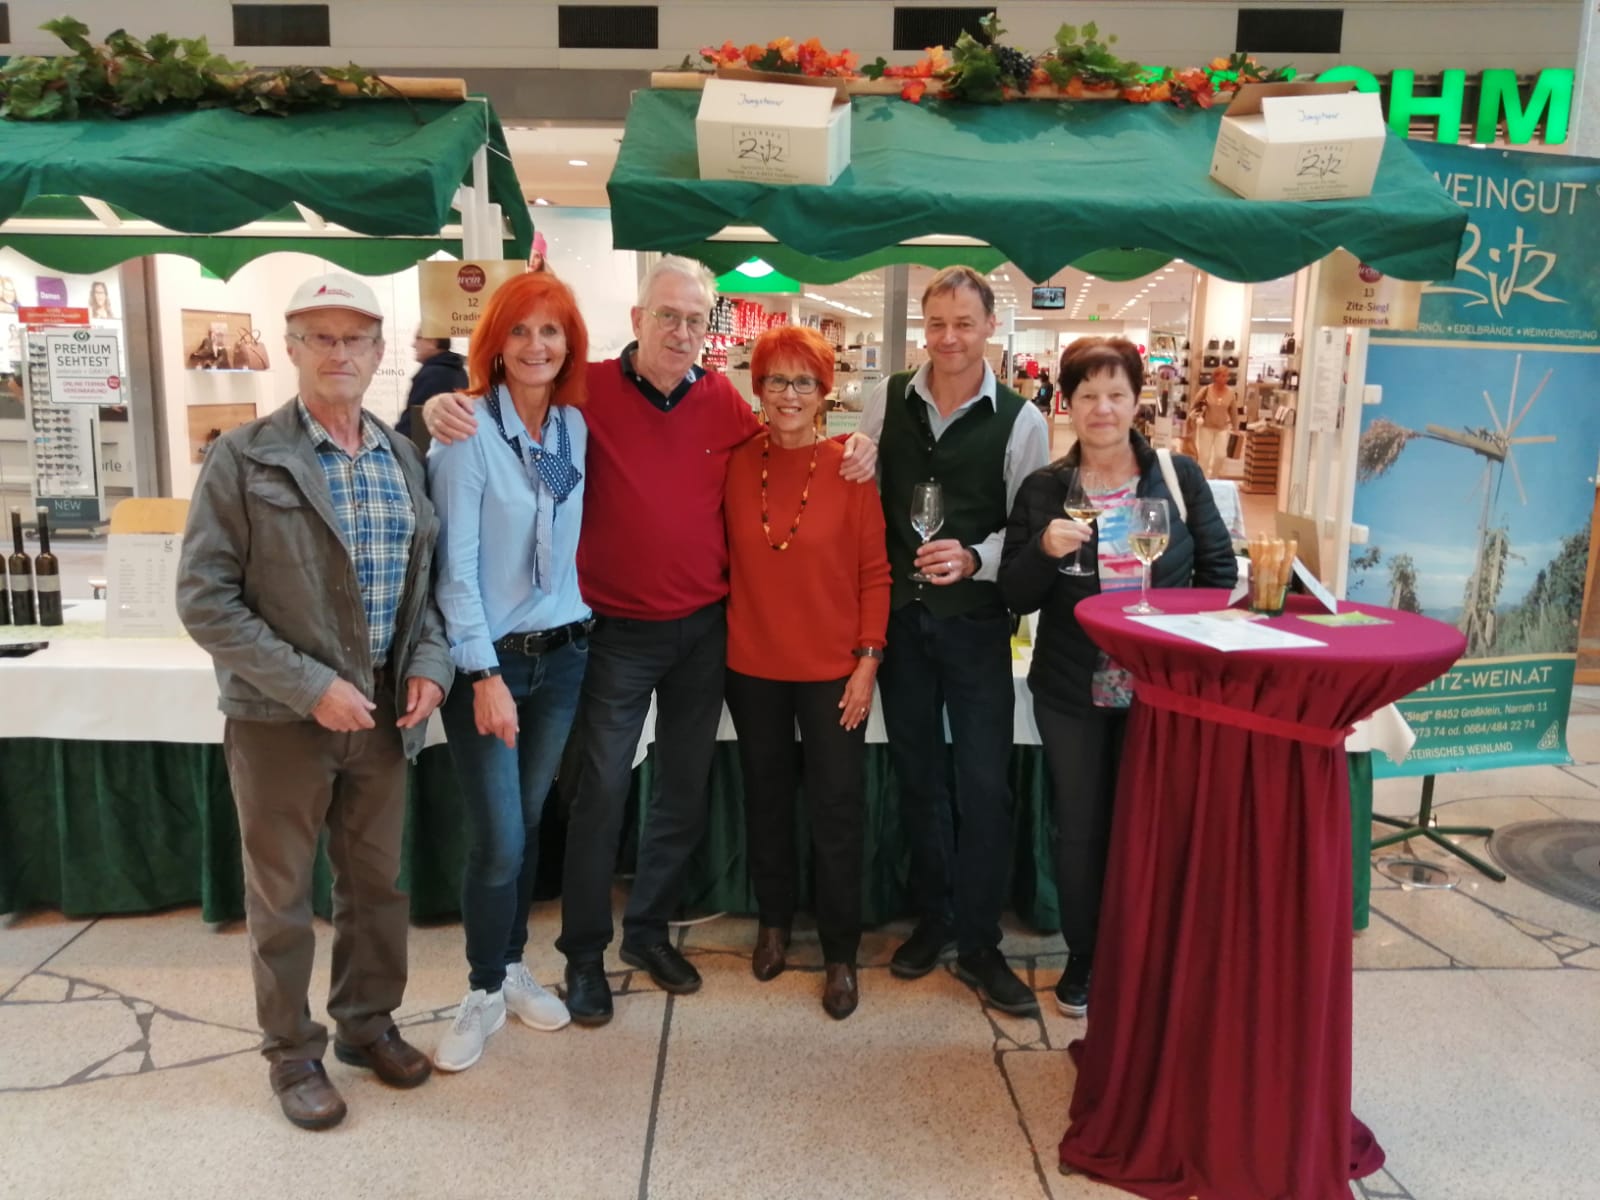 Plus City 2019 Weinfestival